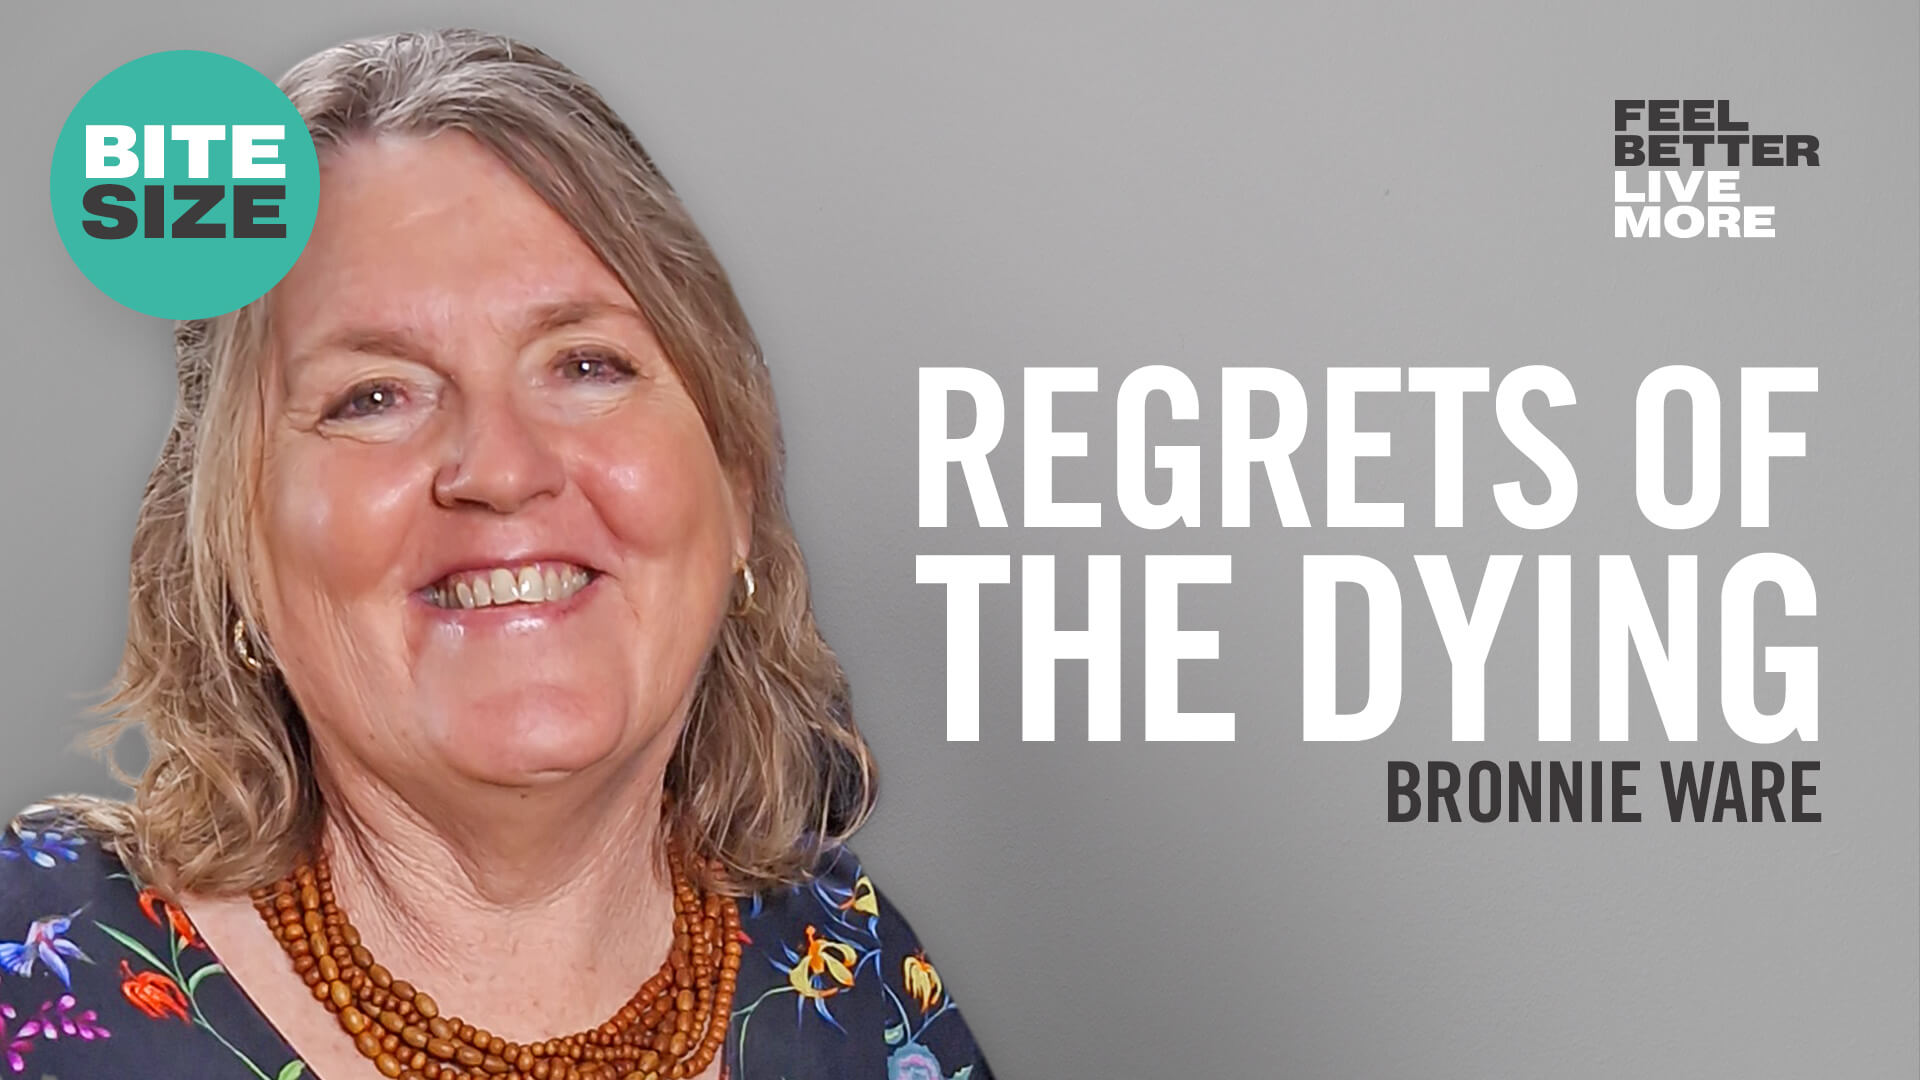 Why The Top Five Regrets of the Dying by Bronnie Ware changed my life?